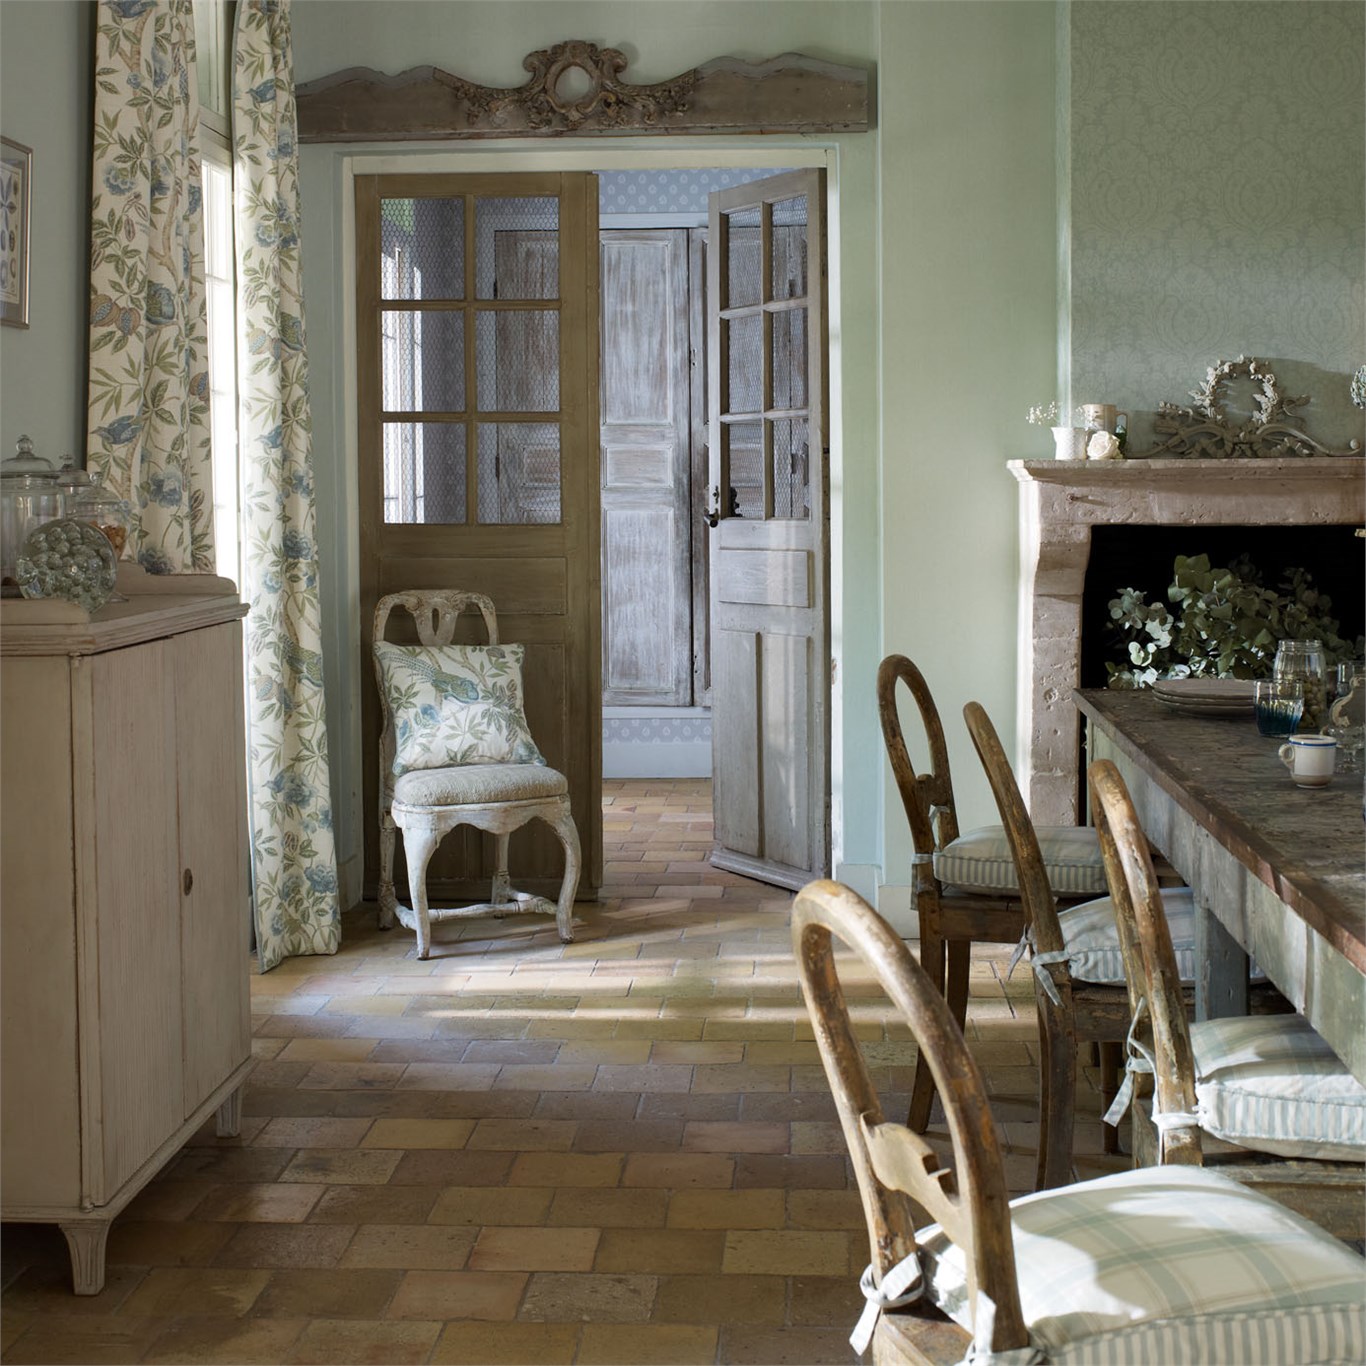 How to achieve a shabby look